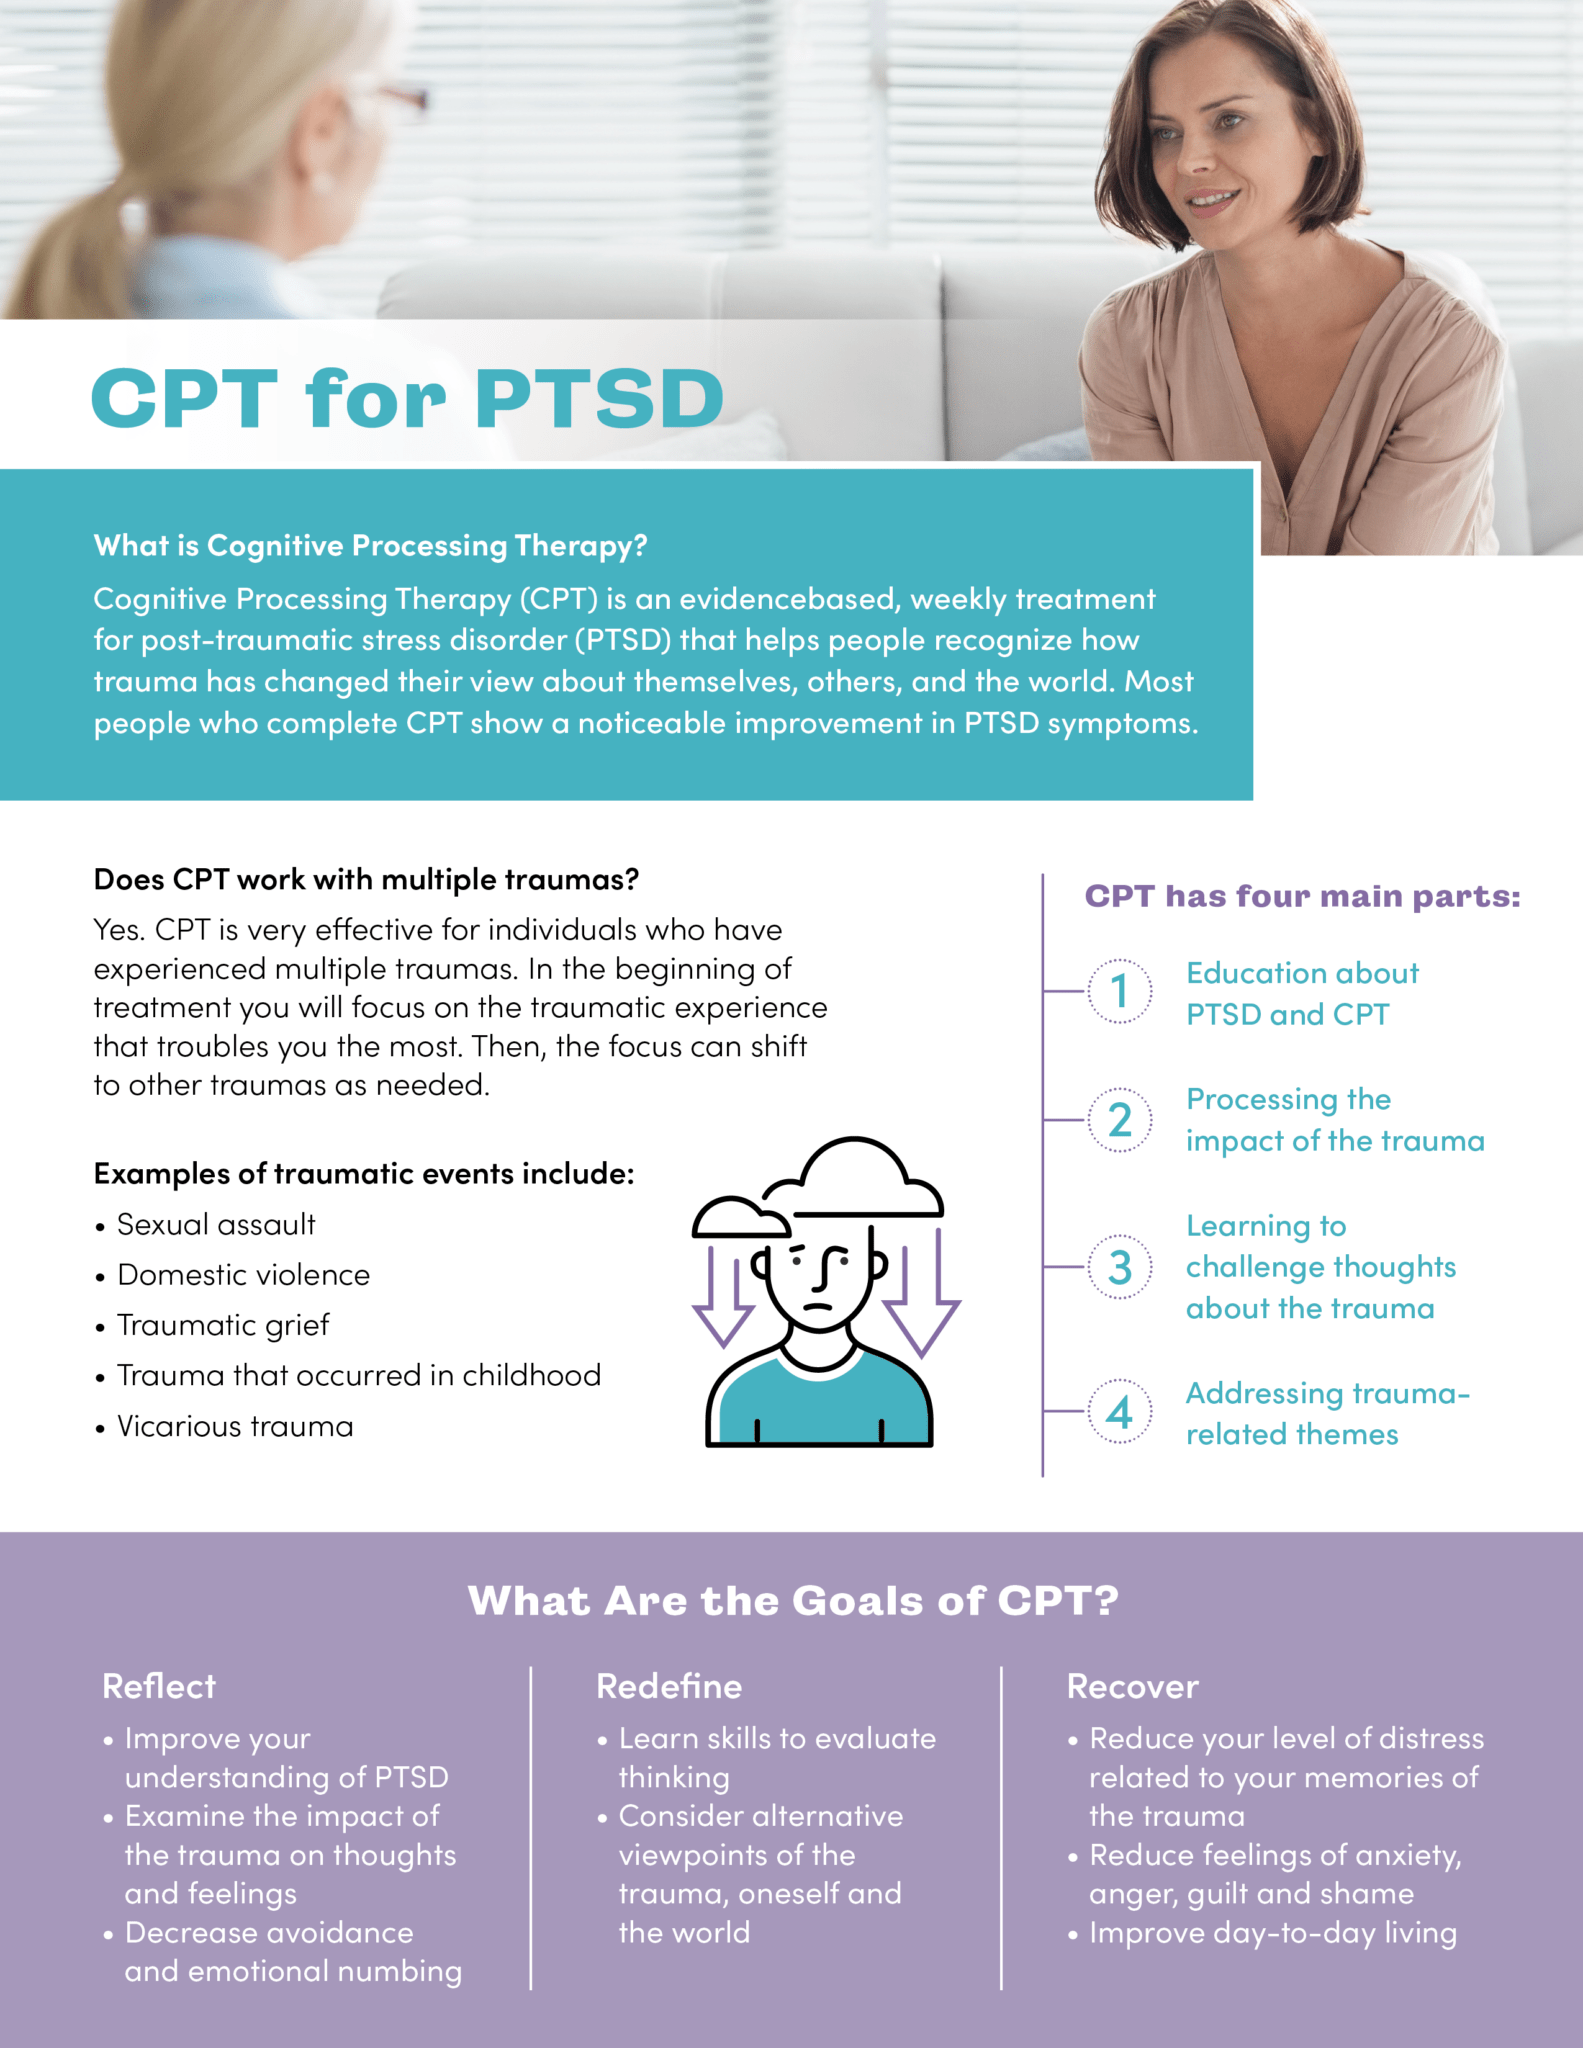 CPT for PTSD